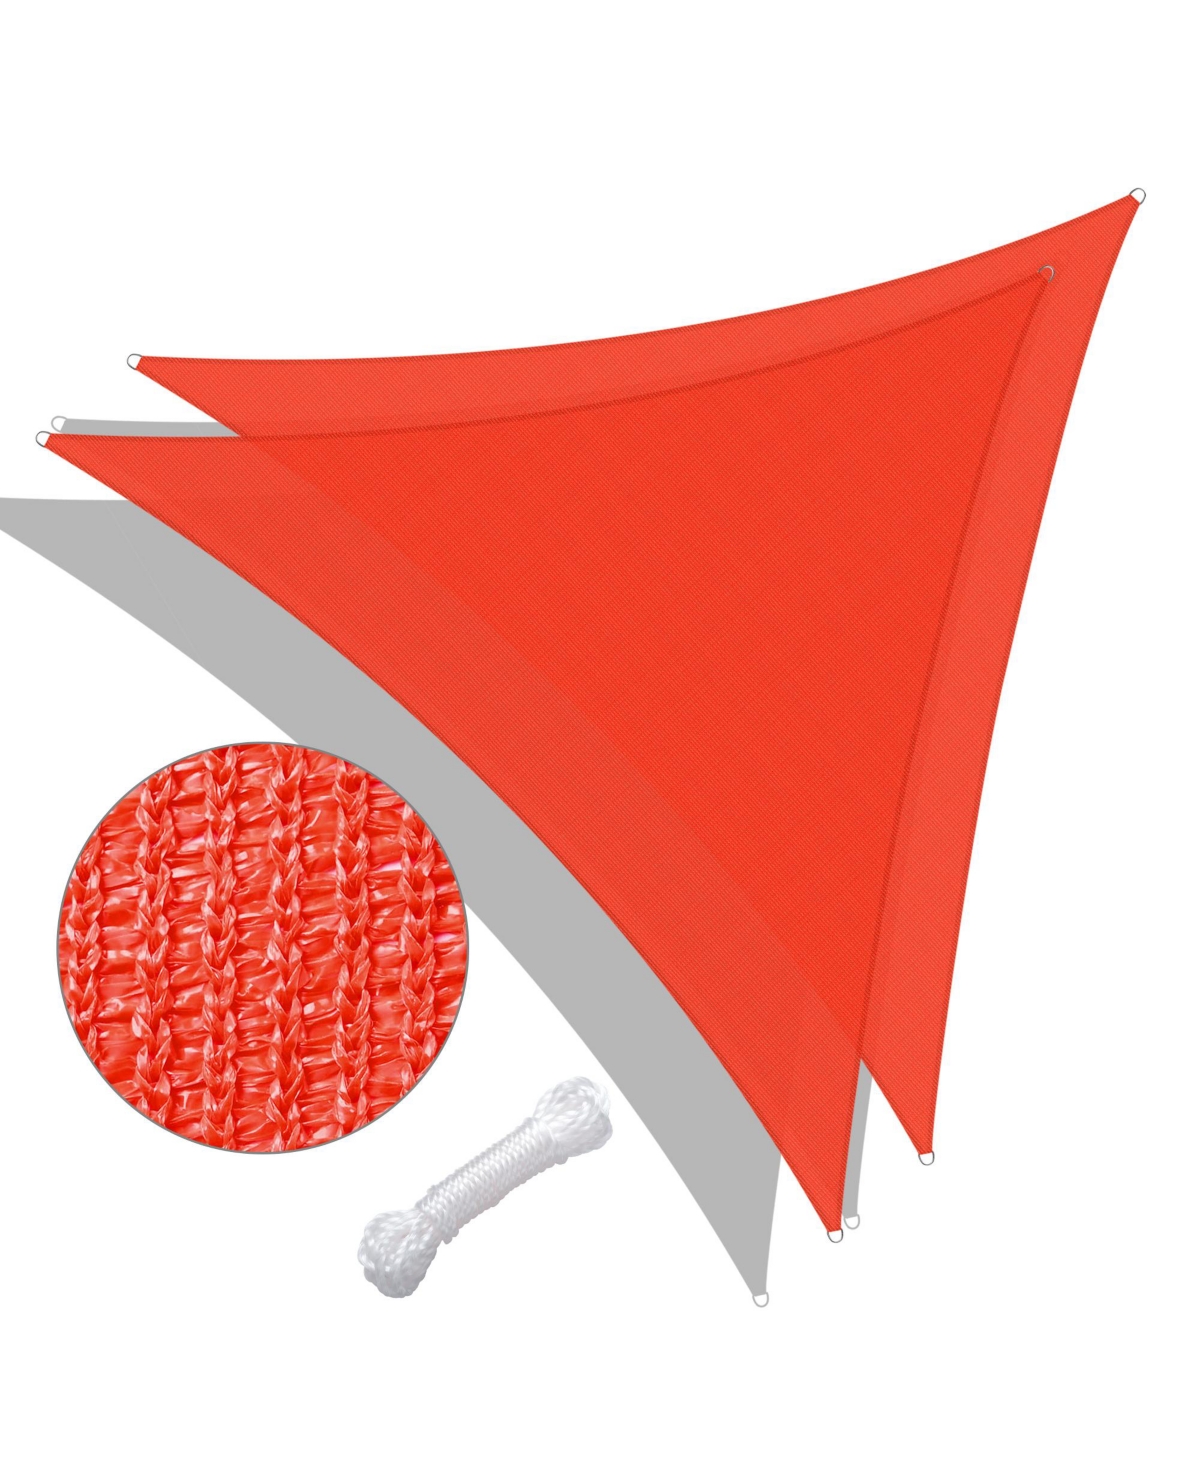 2 Pack 28 Ft 97% Uv Block Triangle Sun Shade Sail Canopy Outdoor Pool Cover Net - Watermelon red